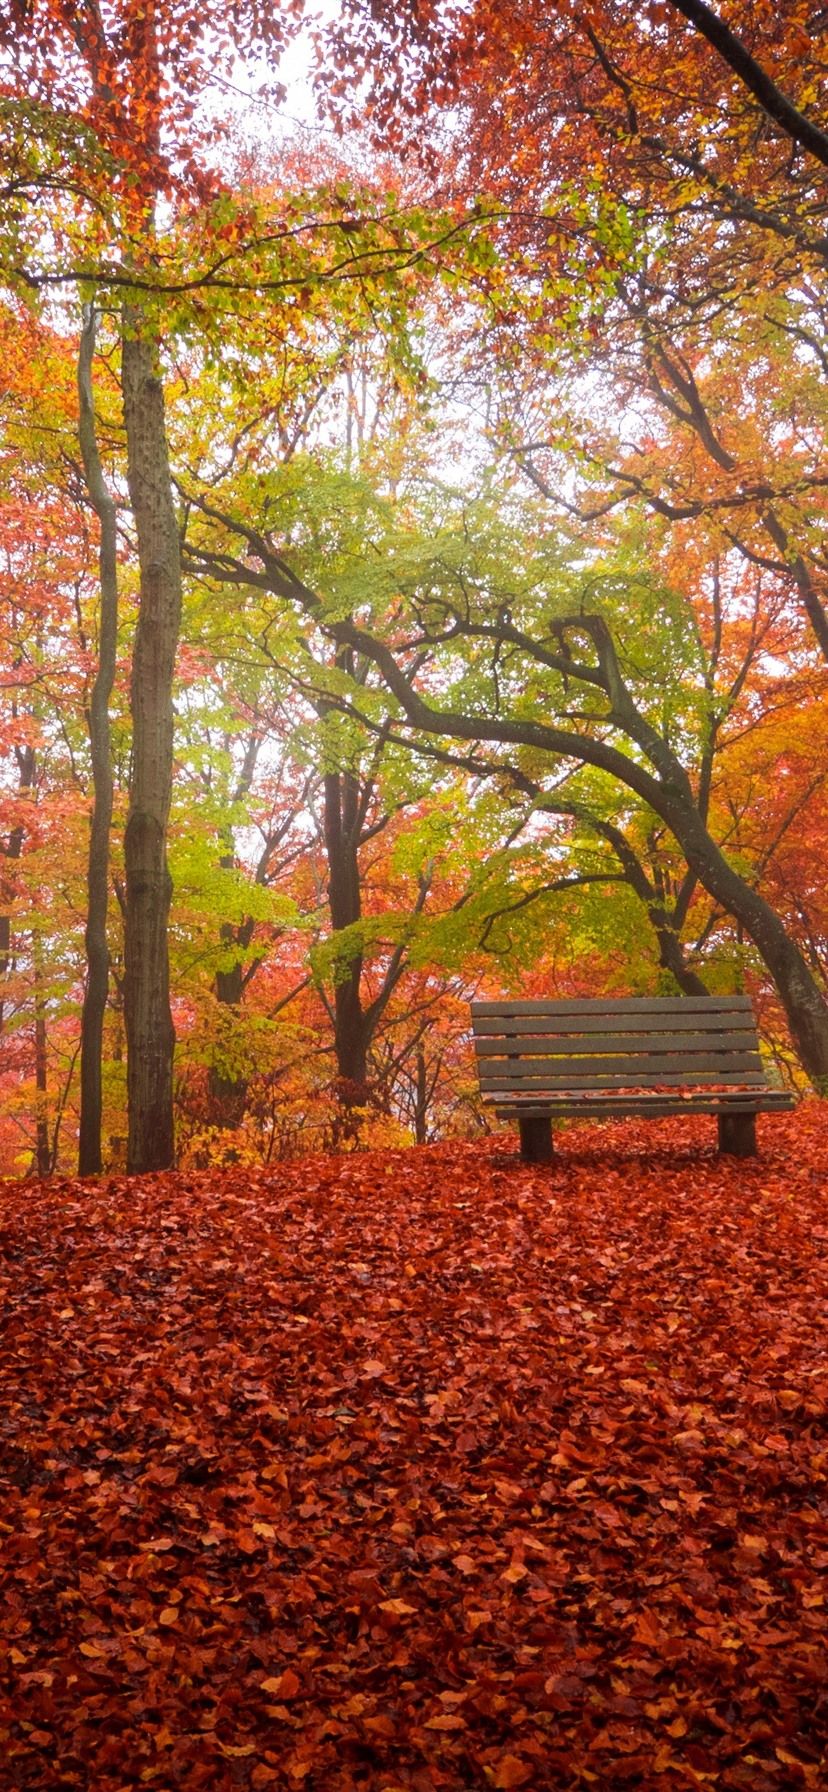 Autumn, Trees, Red Leaves Ground, Bench, Park 1125x2436 IPhone 11 Pro XS X Wallpaper, Background, Picture, Image